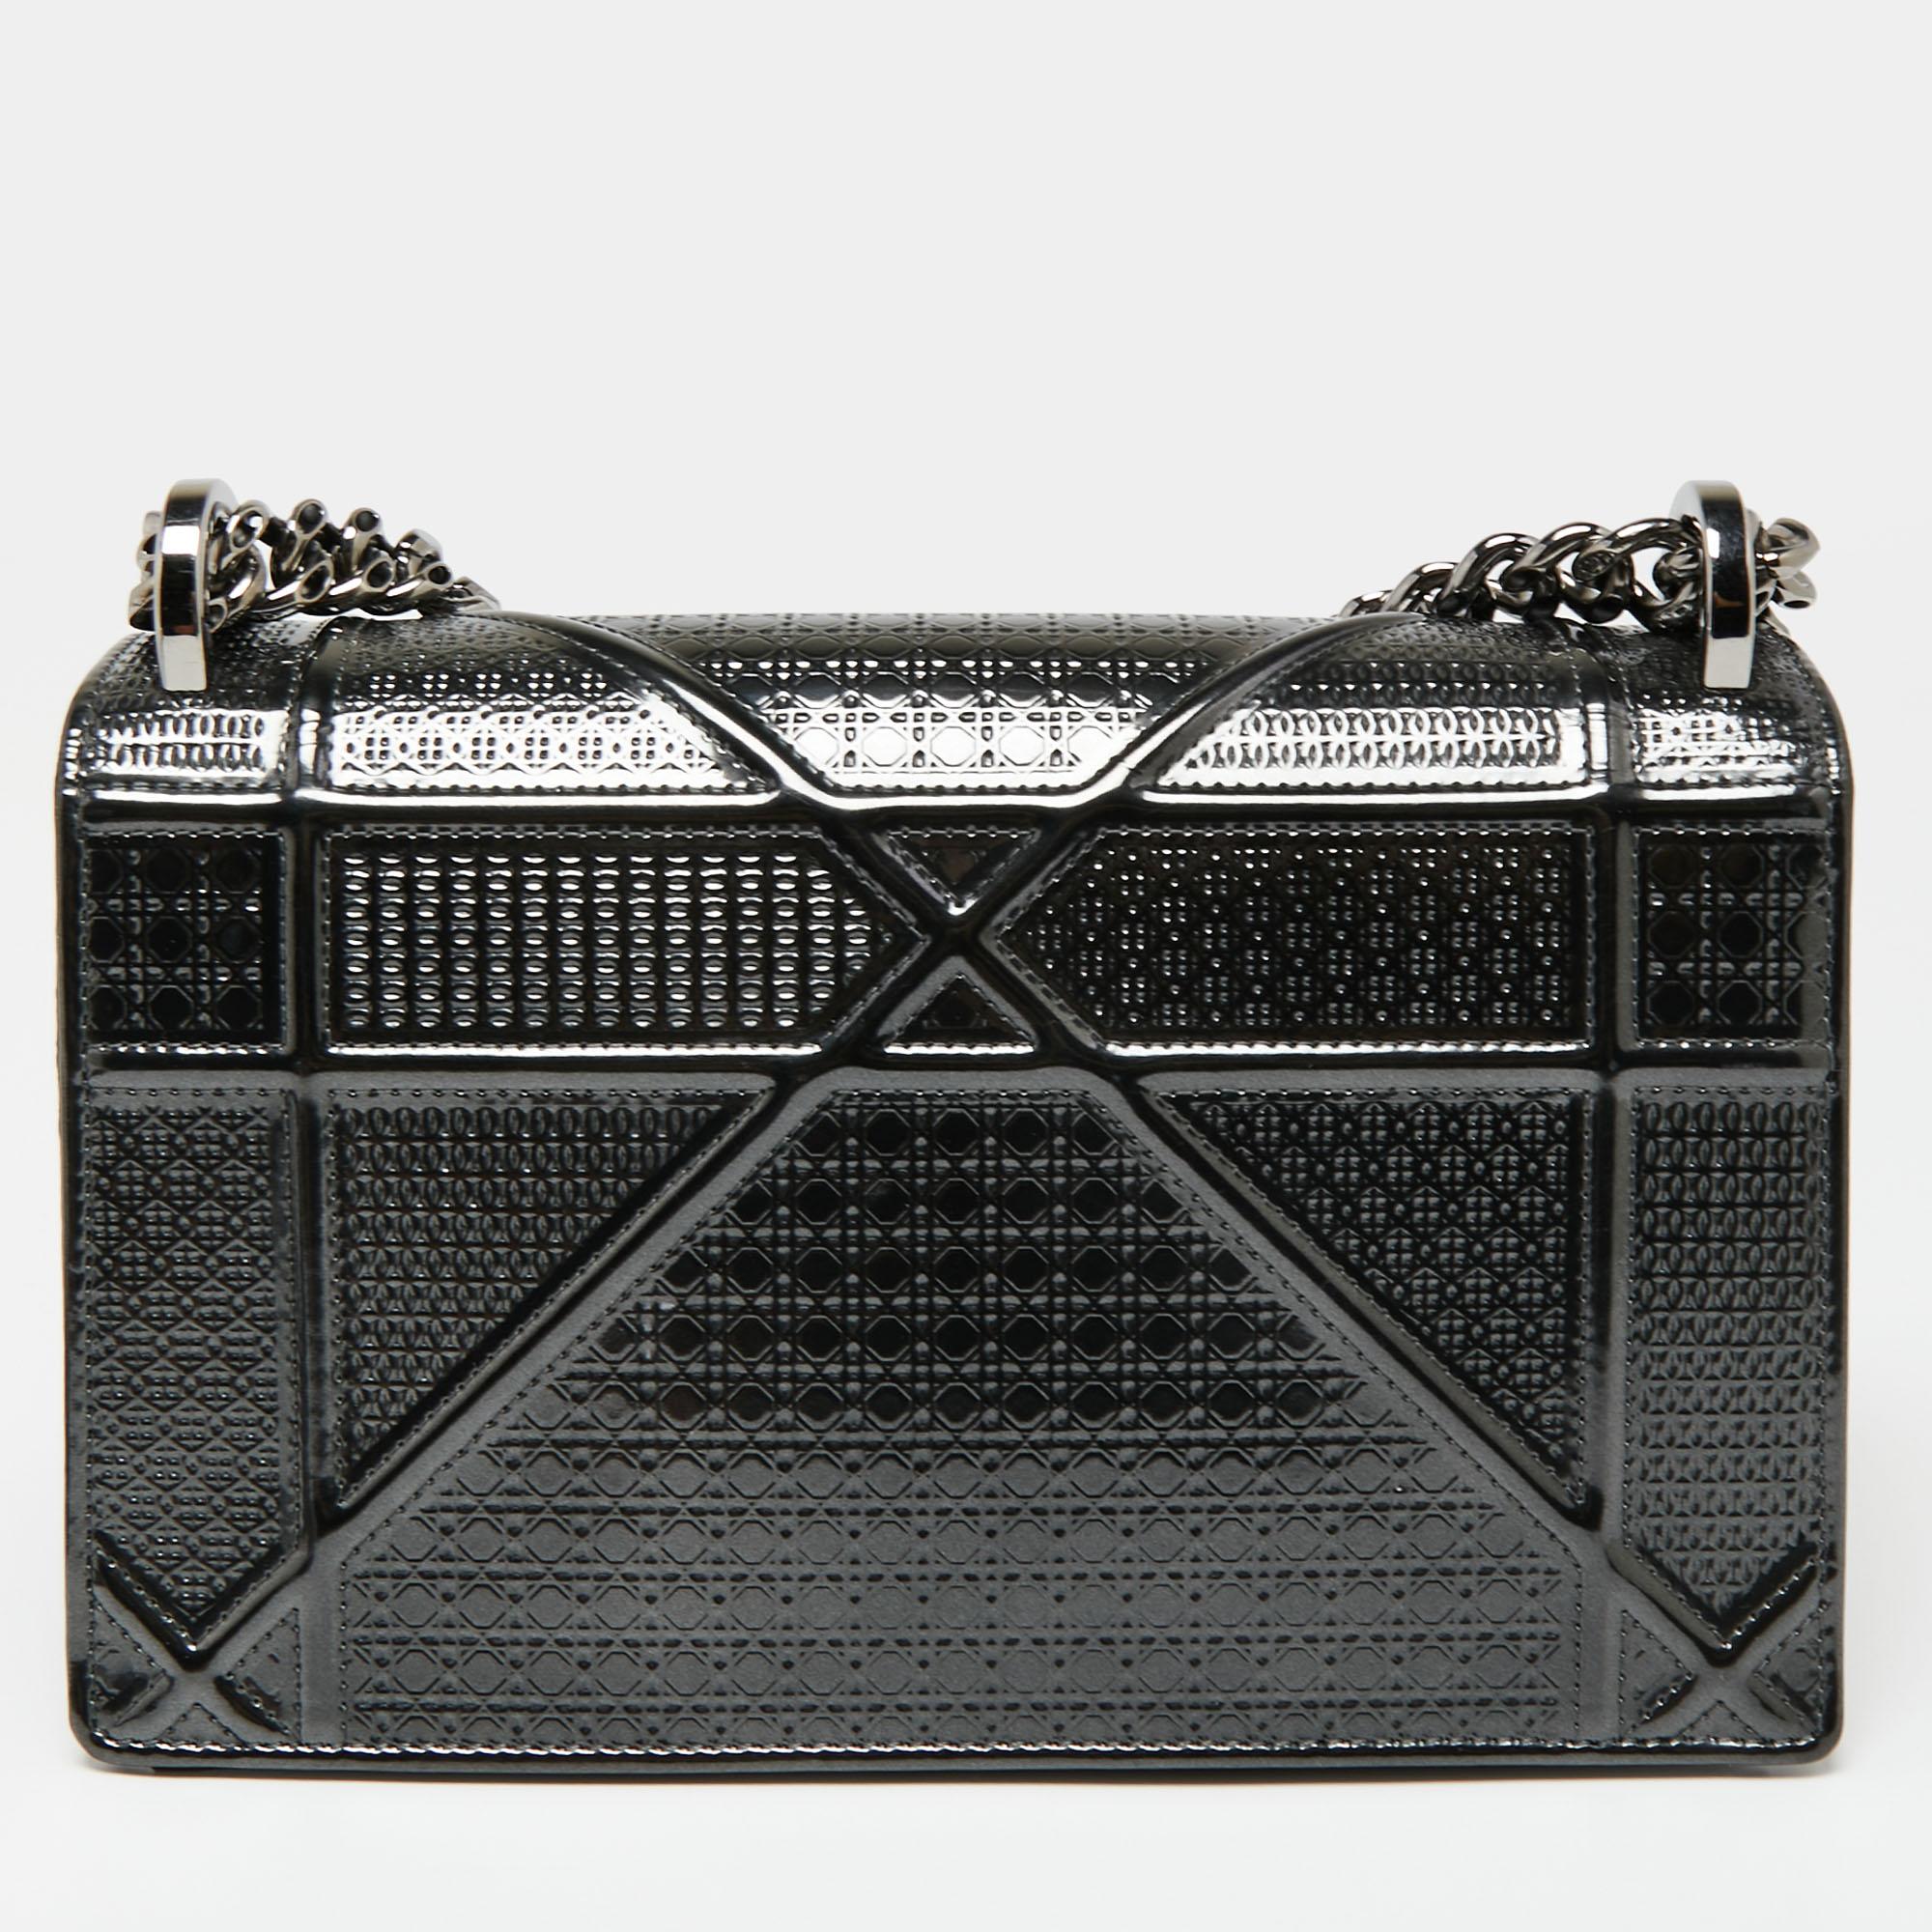 This Diorama bag is simply breathtaking! From its structured shape to its artistic craftsmanship, the bag sweeps us off our feet. It has been crafted from grey patent leather and is covered in the brand's signature Cannage pattern. The magnetic